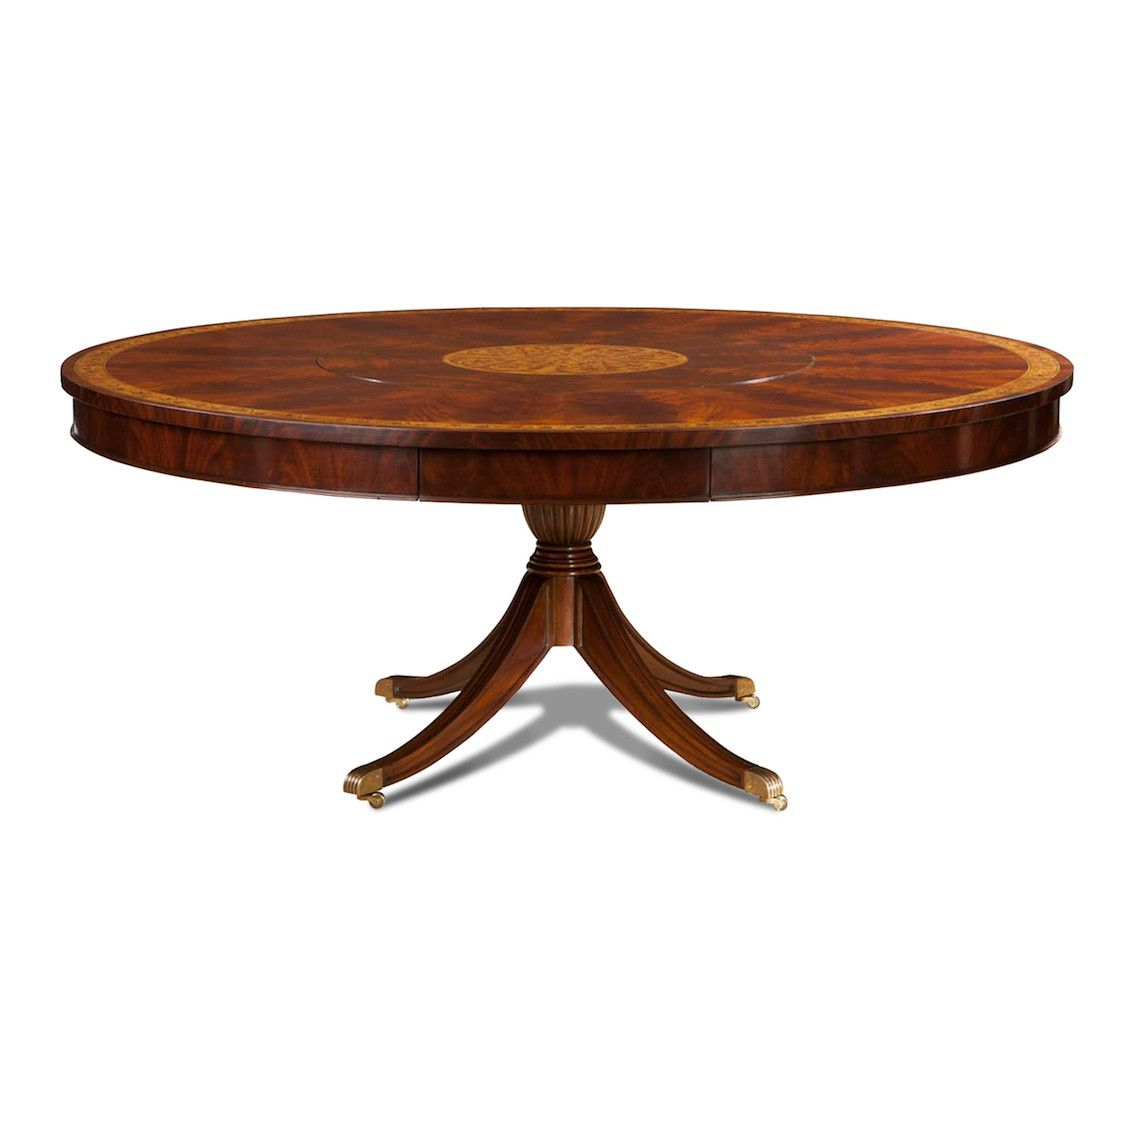 Round Dining Room Table With Built In Lazy Susan • Faucet Ideas Site